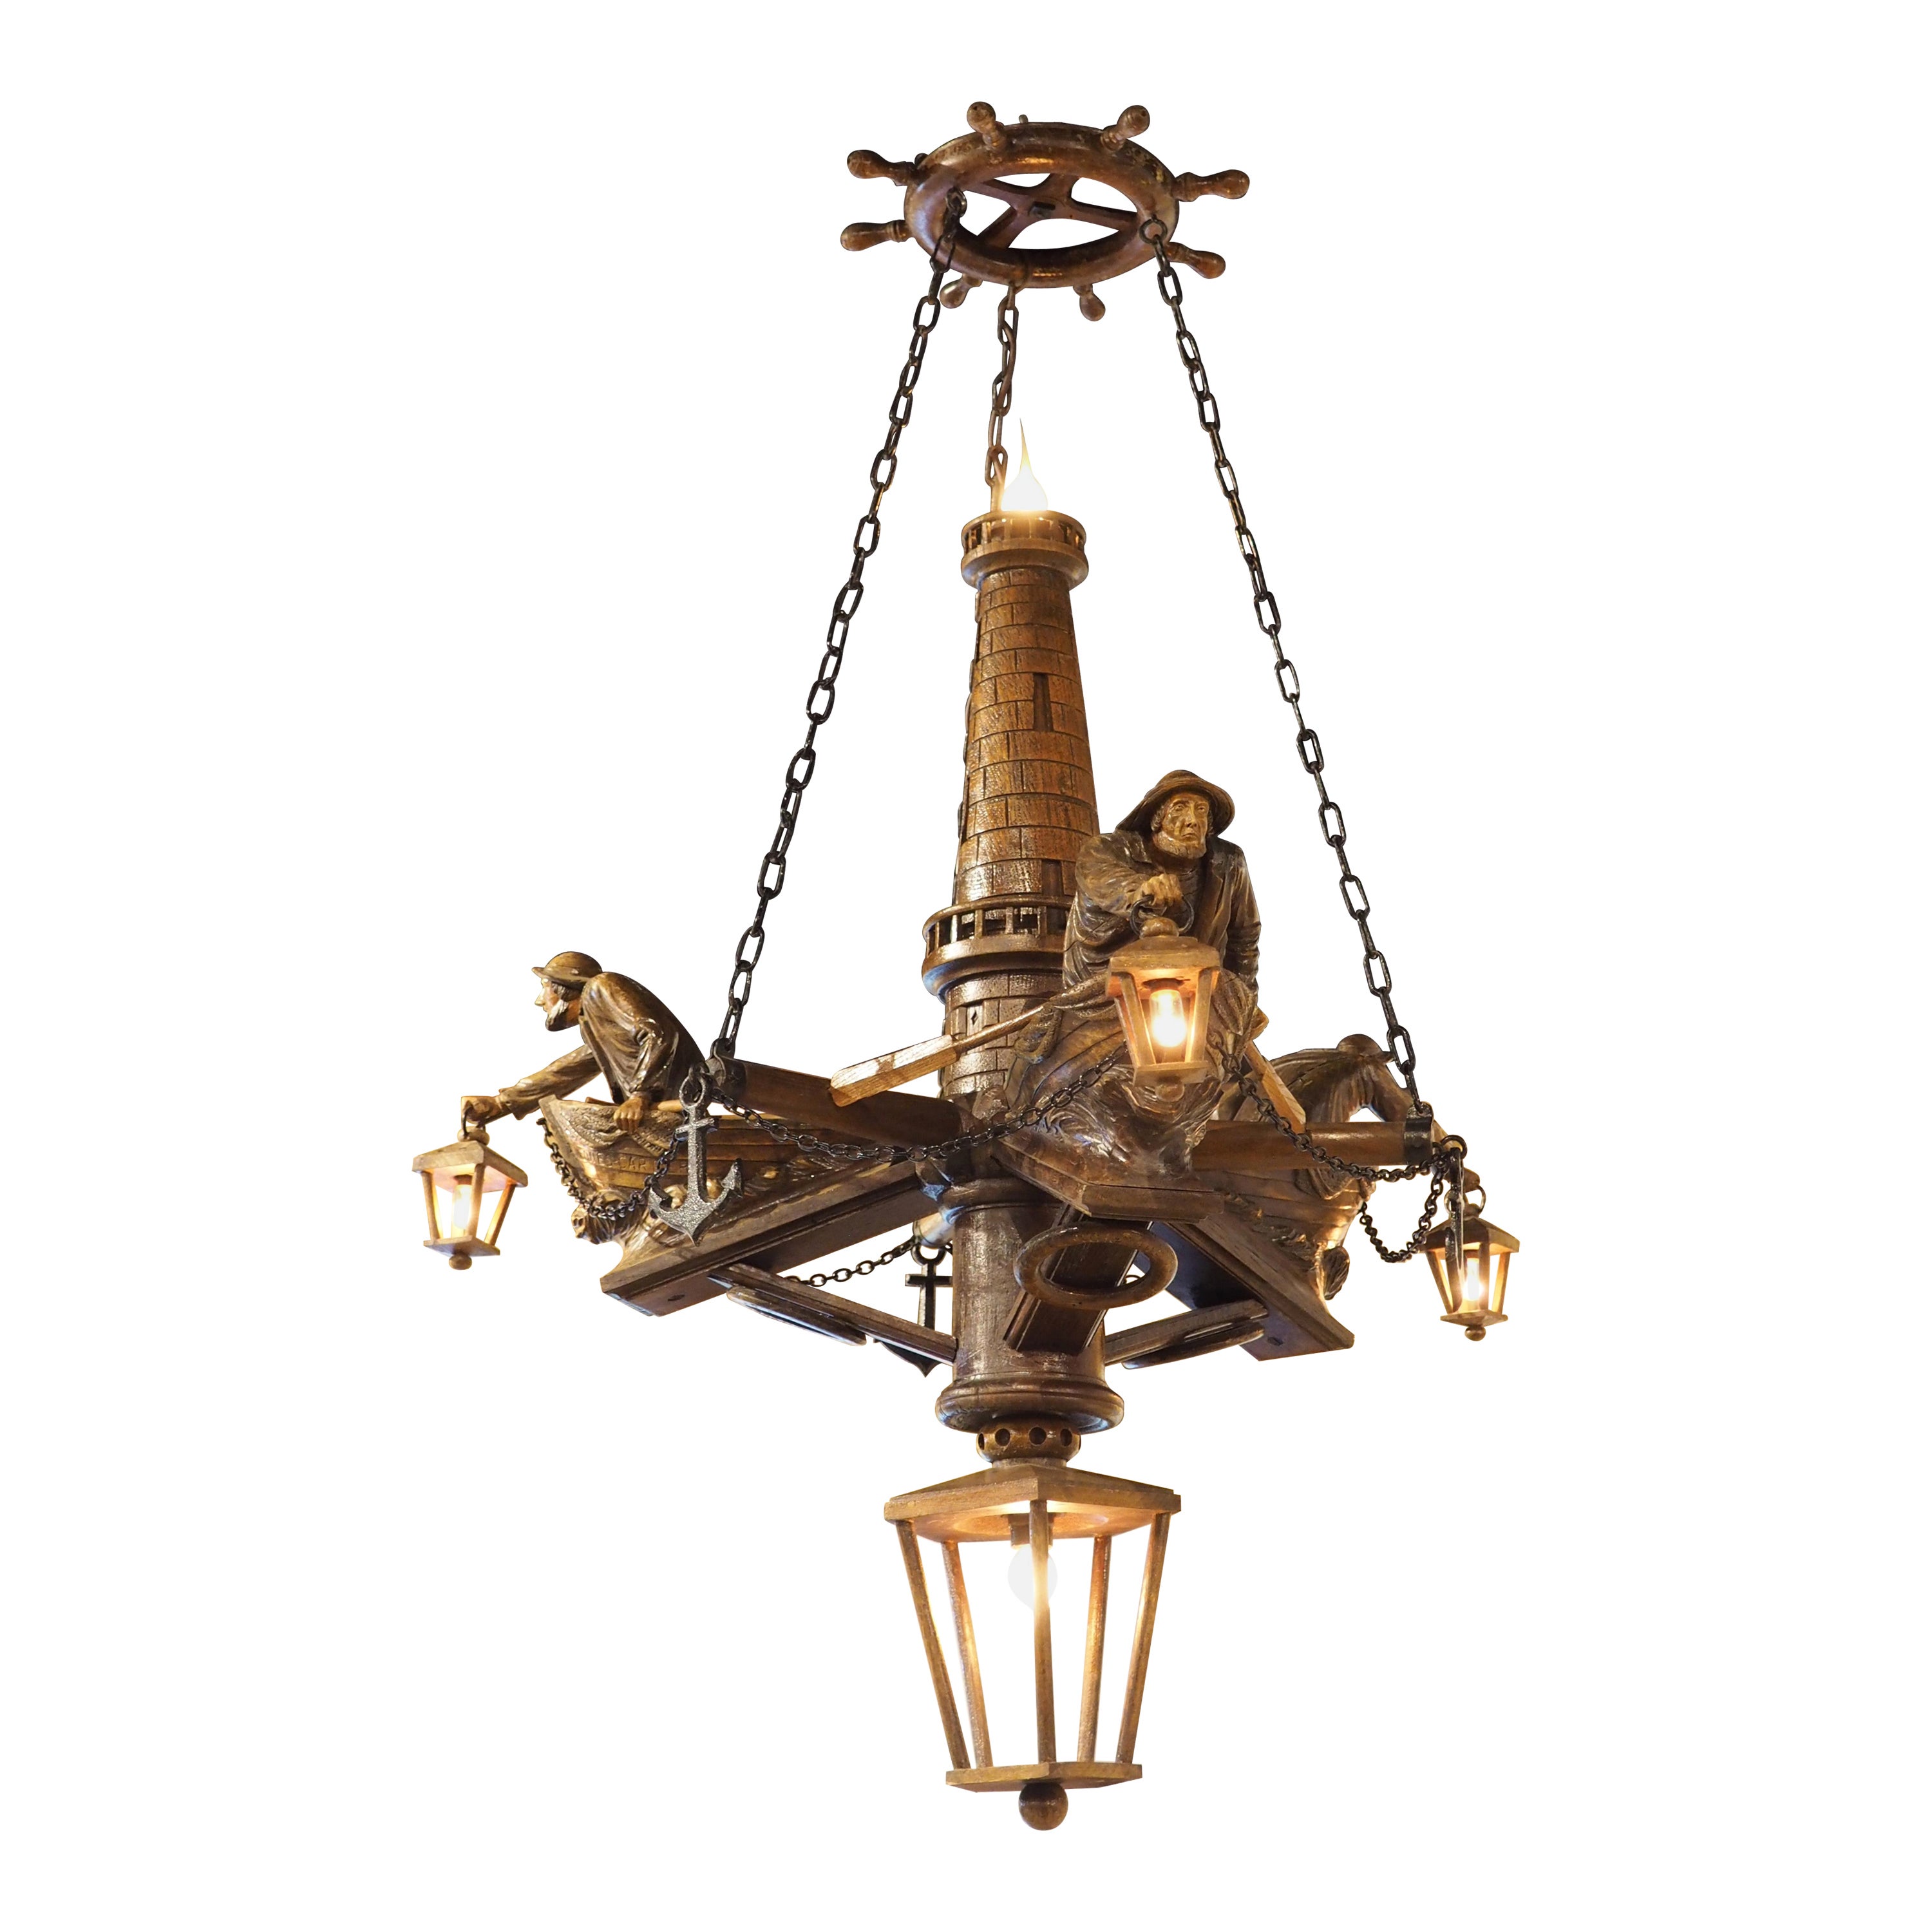 Early 1900s Carved Wood Chandelier from Brittany, France, "Sailors of St. Malo"